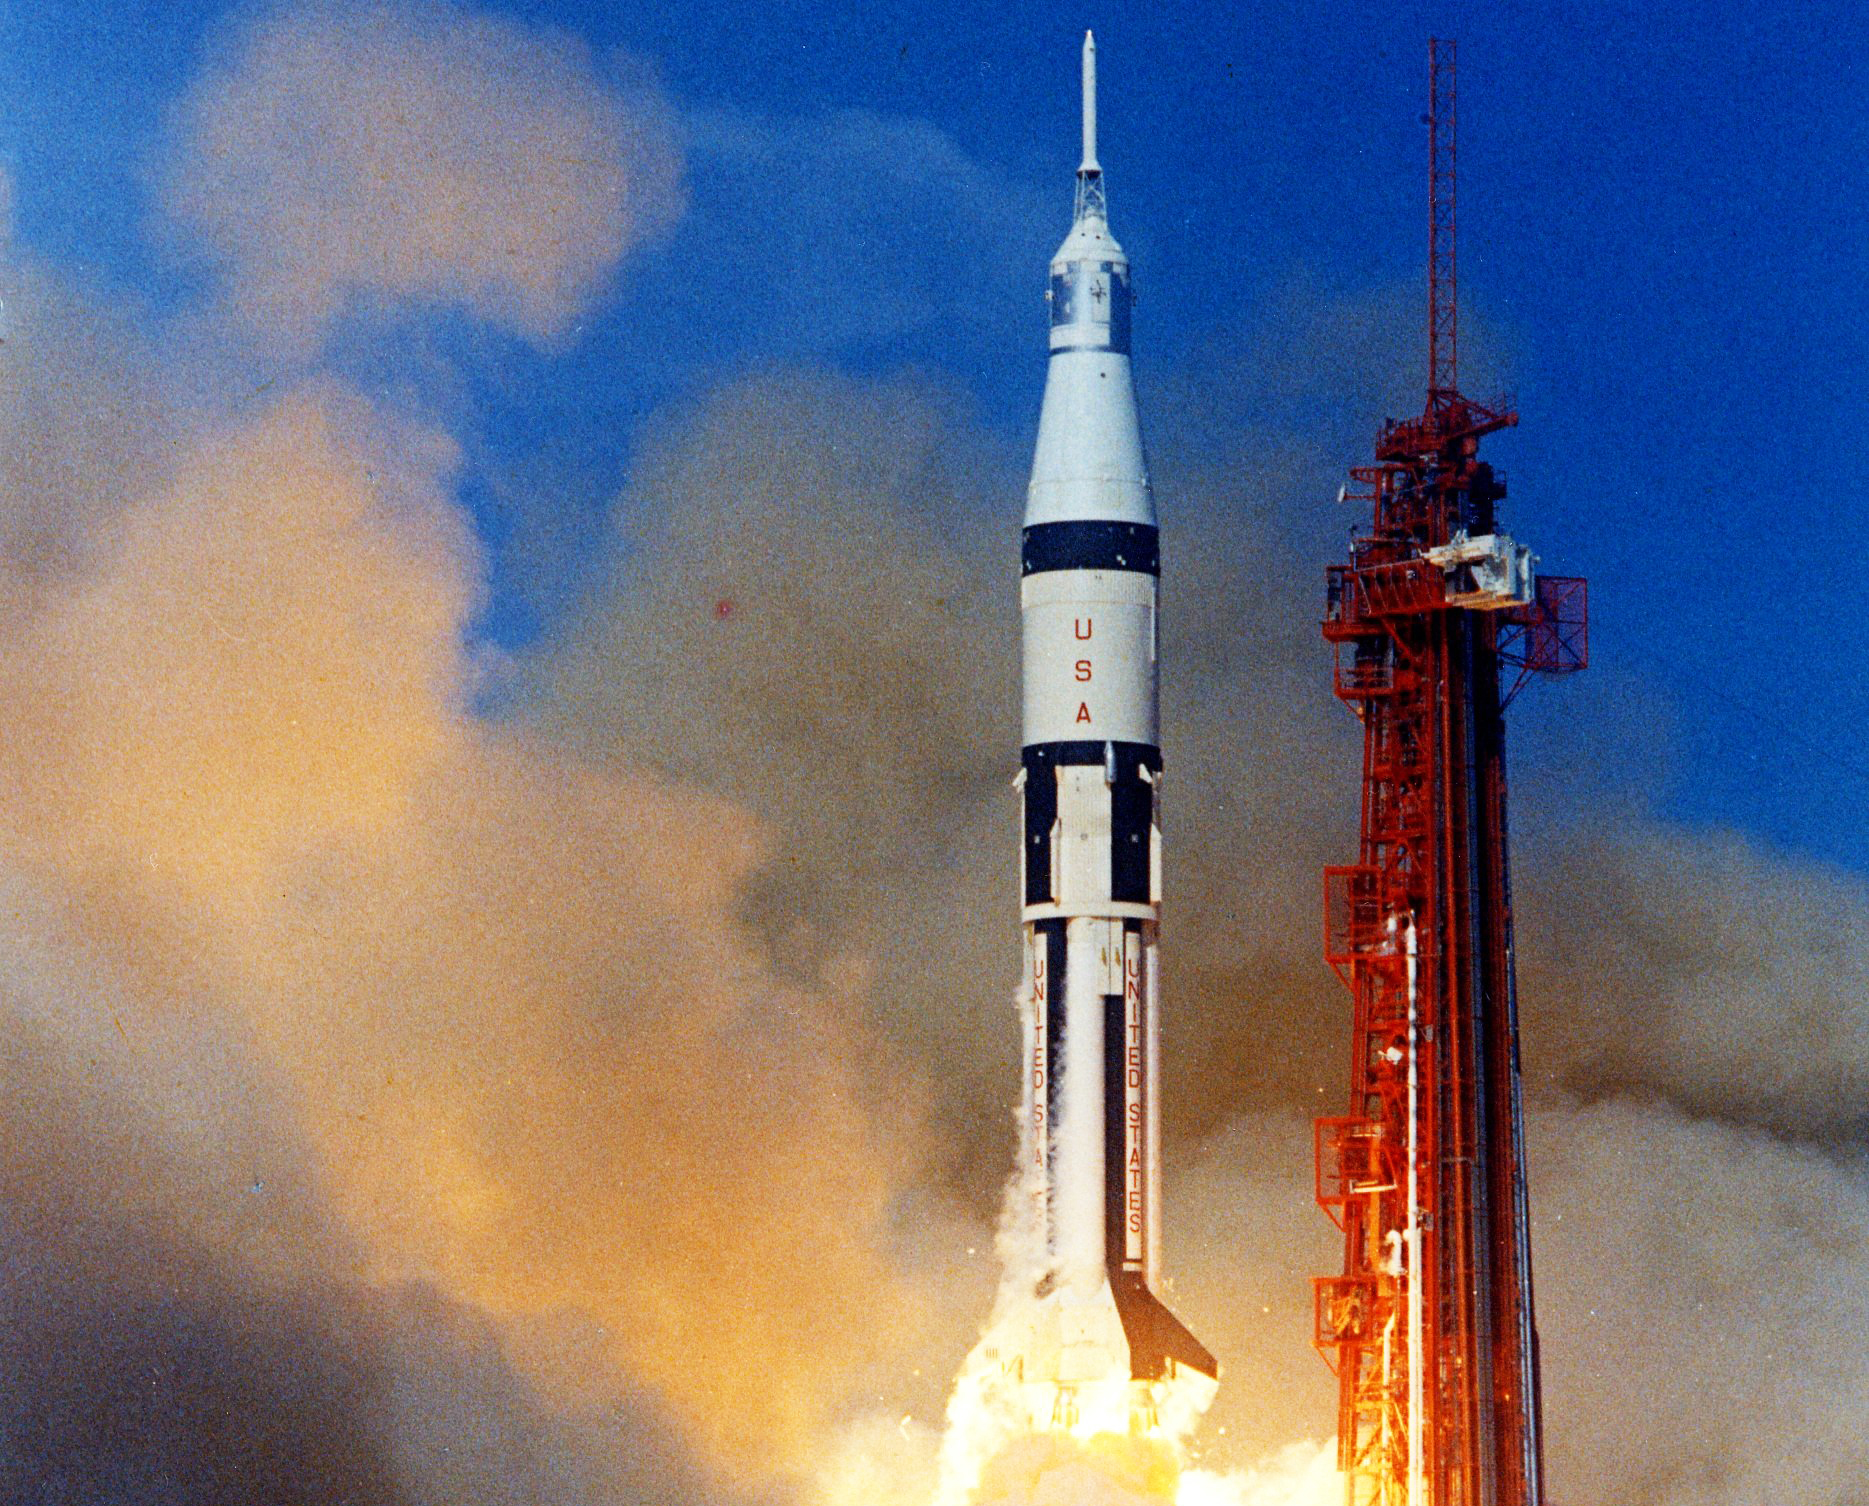 On This Day In Space: Oct. 11, 1968: Apollo 7 launches the 1st Apollo crew into orbit